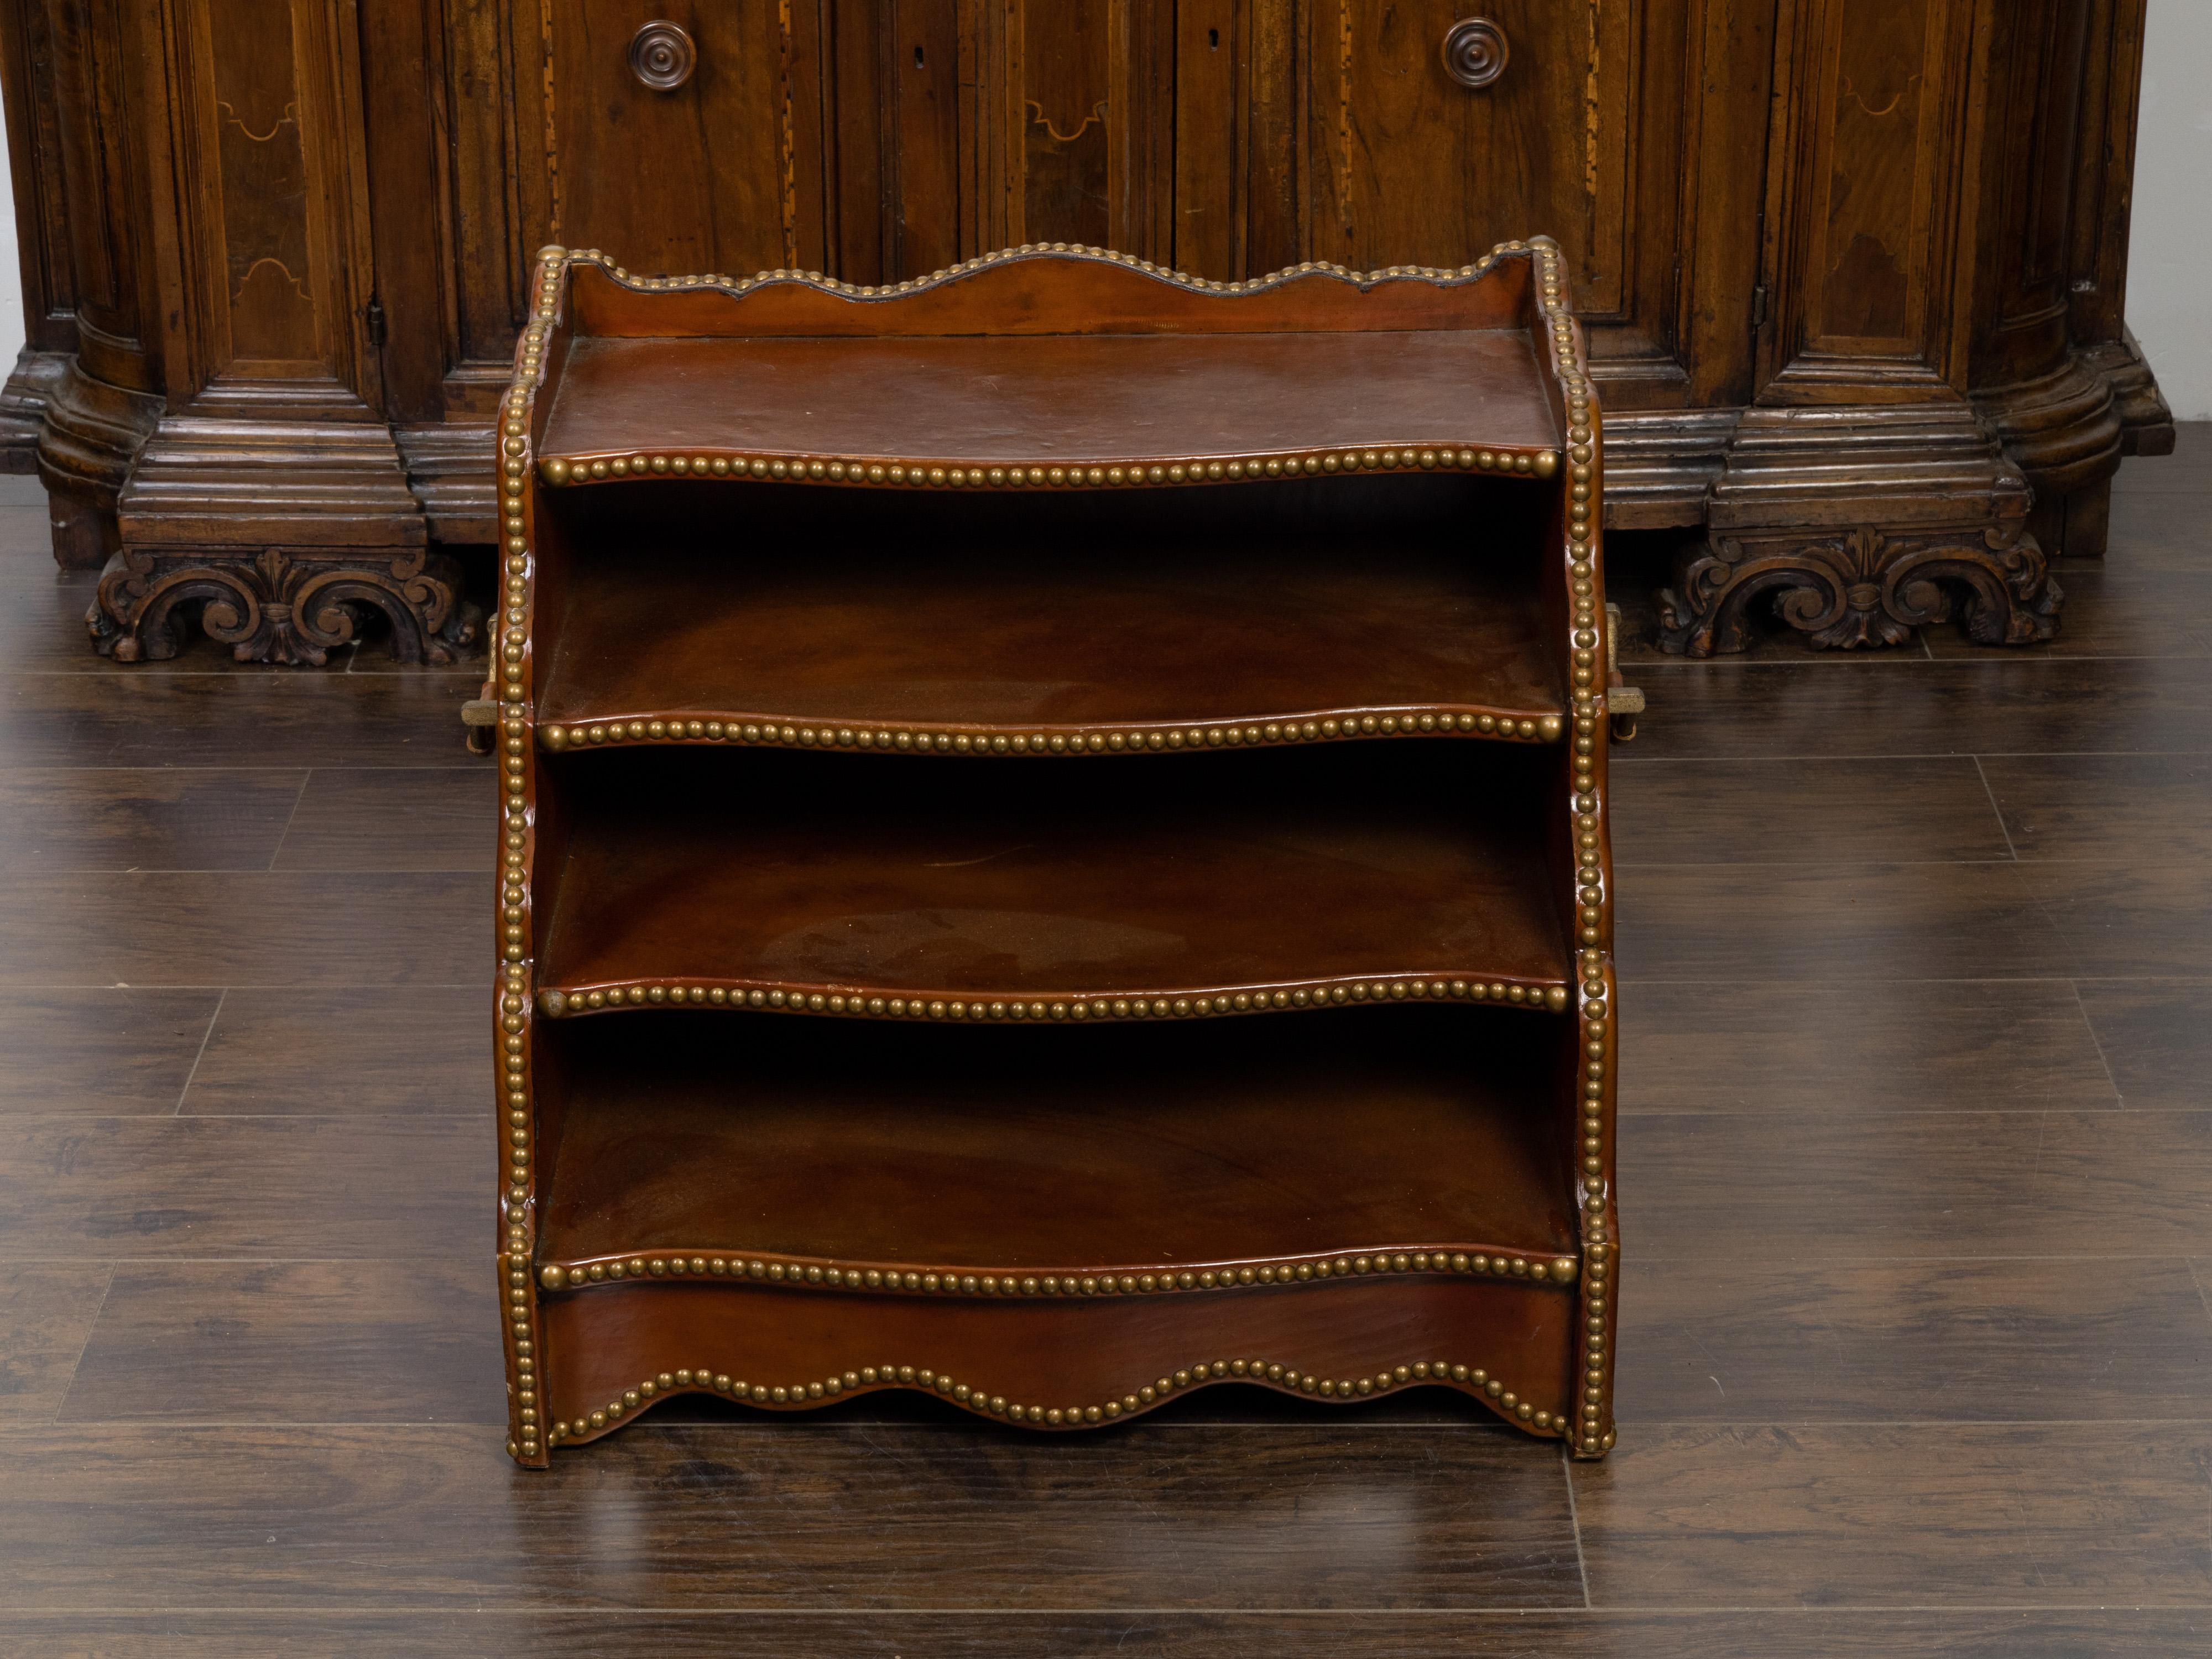 20th Century English Midcentury Leather Magazine Rack with Four Shelves and Brass Nailheads For Sale